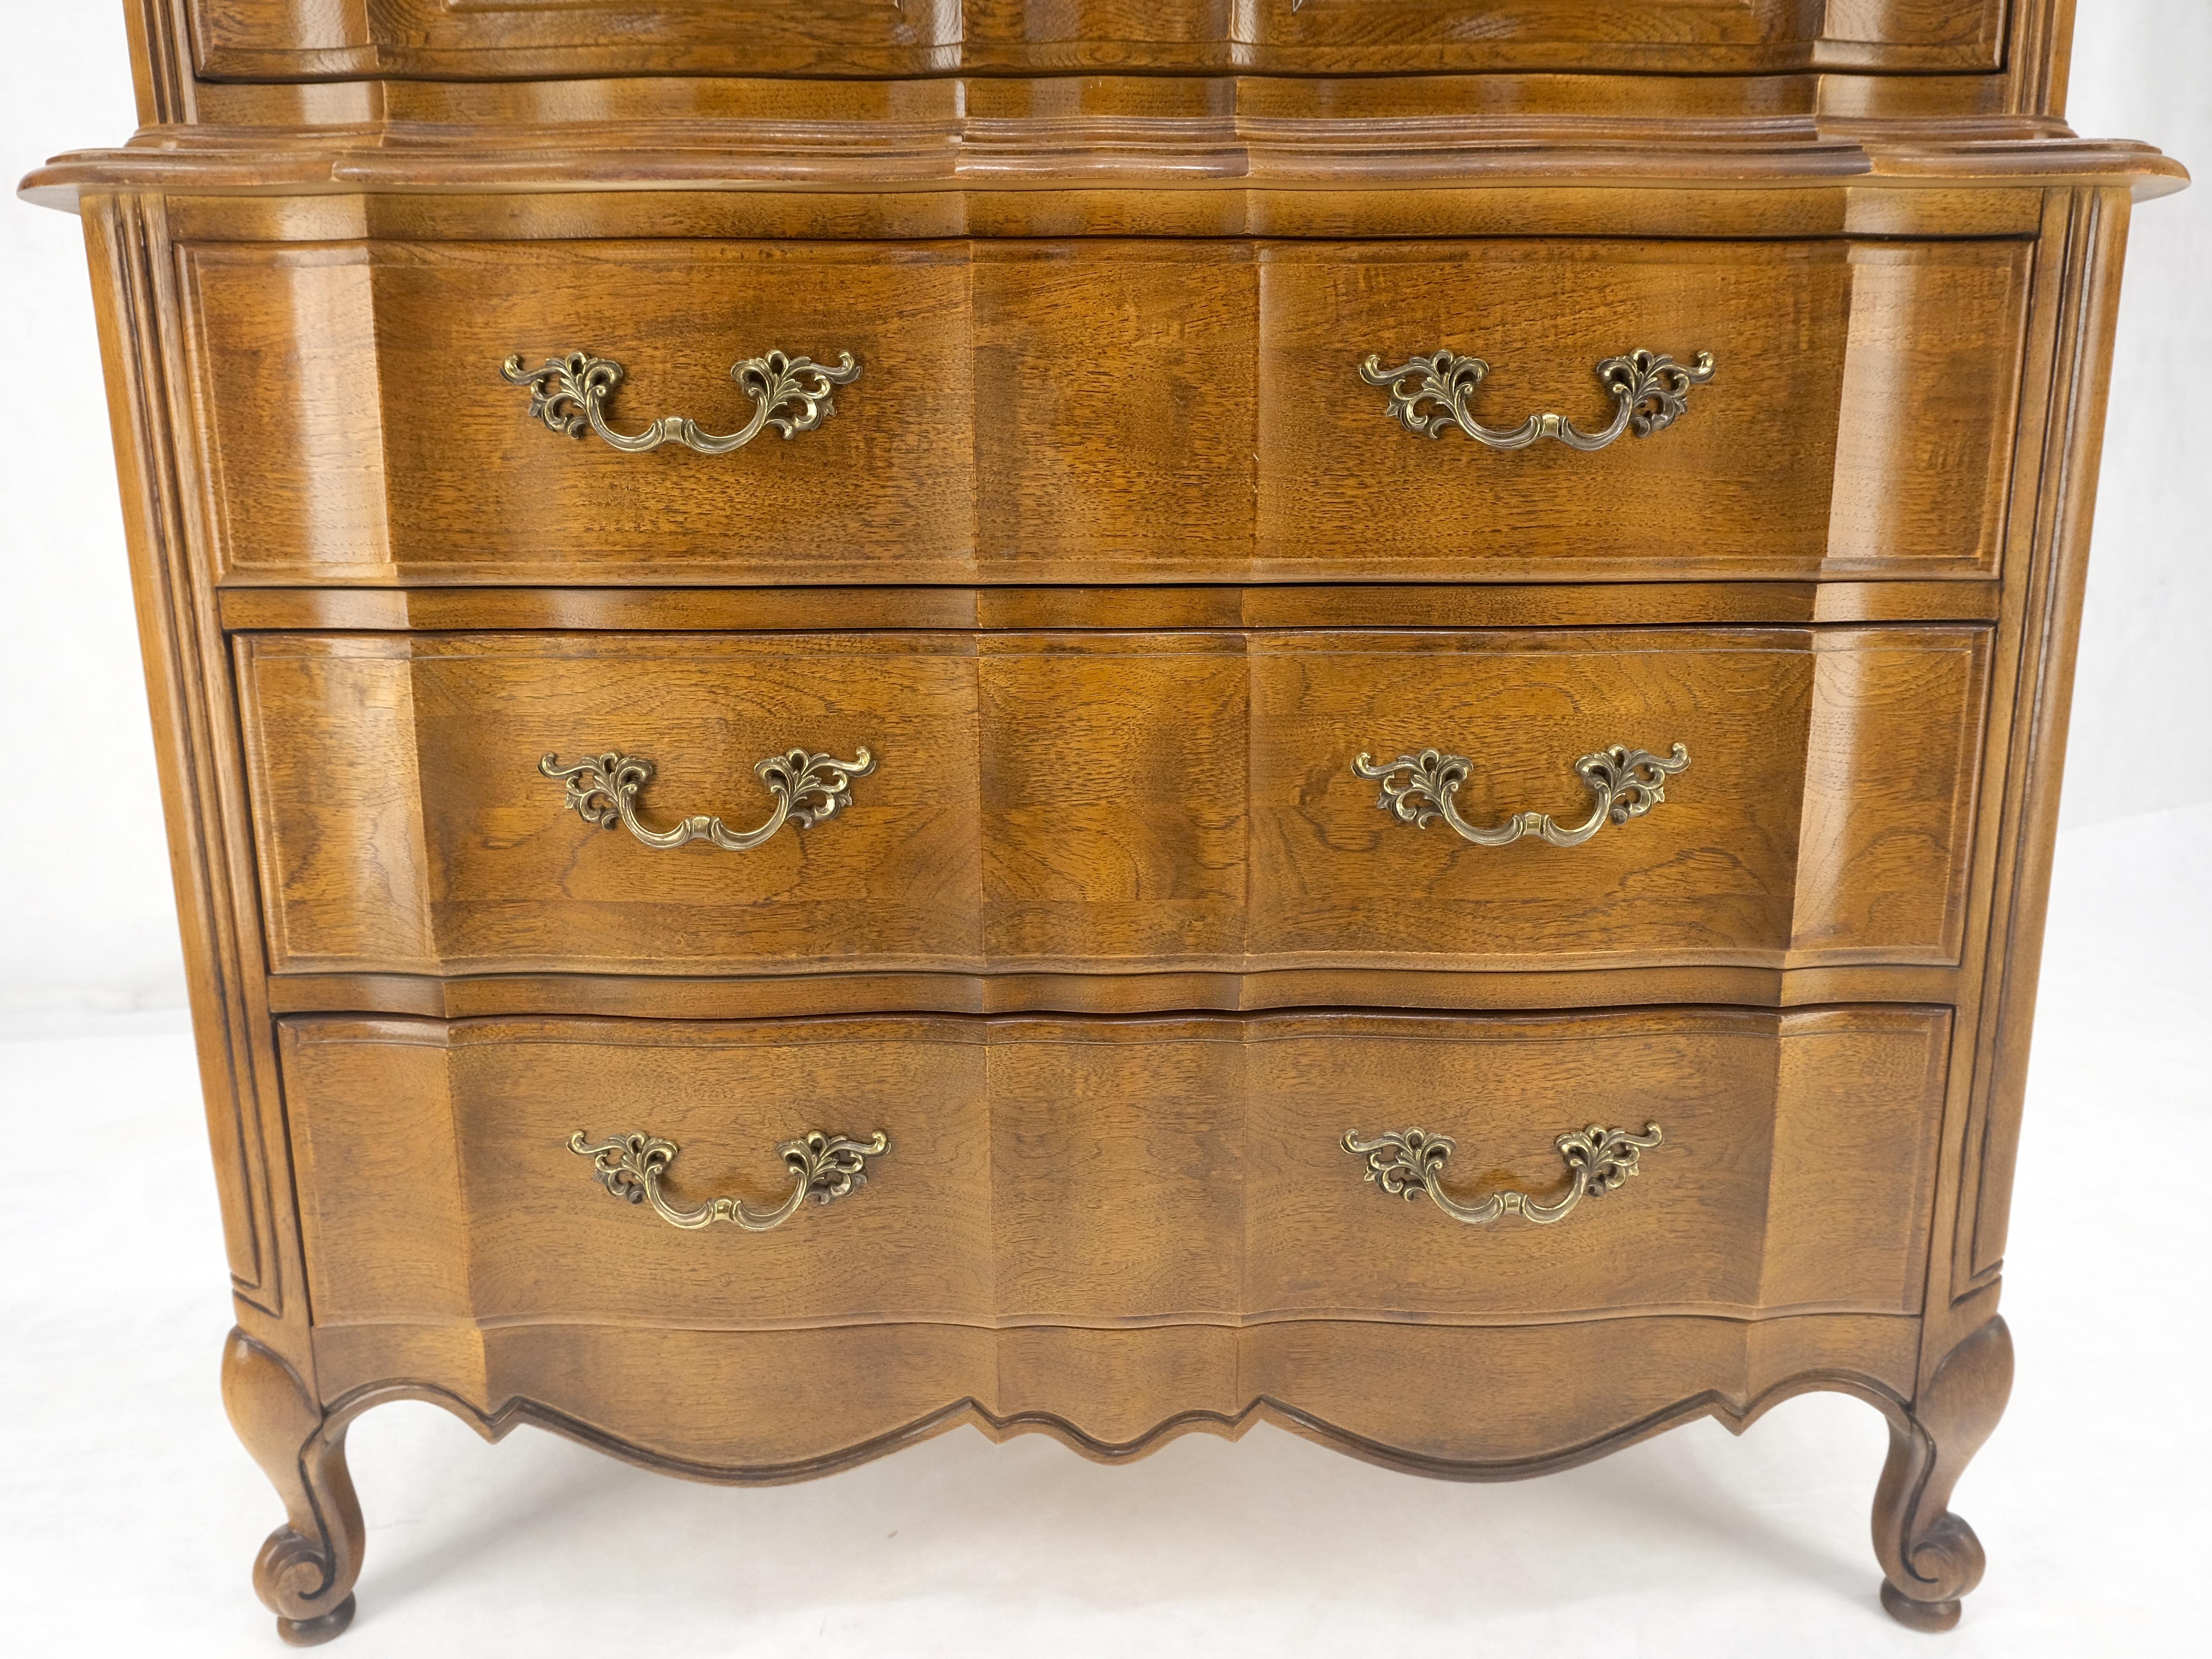 French Provincial Dark Amber Tone 6 Drawers High Boy French Chest of Drawers by Thomasville MINT! For Sale